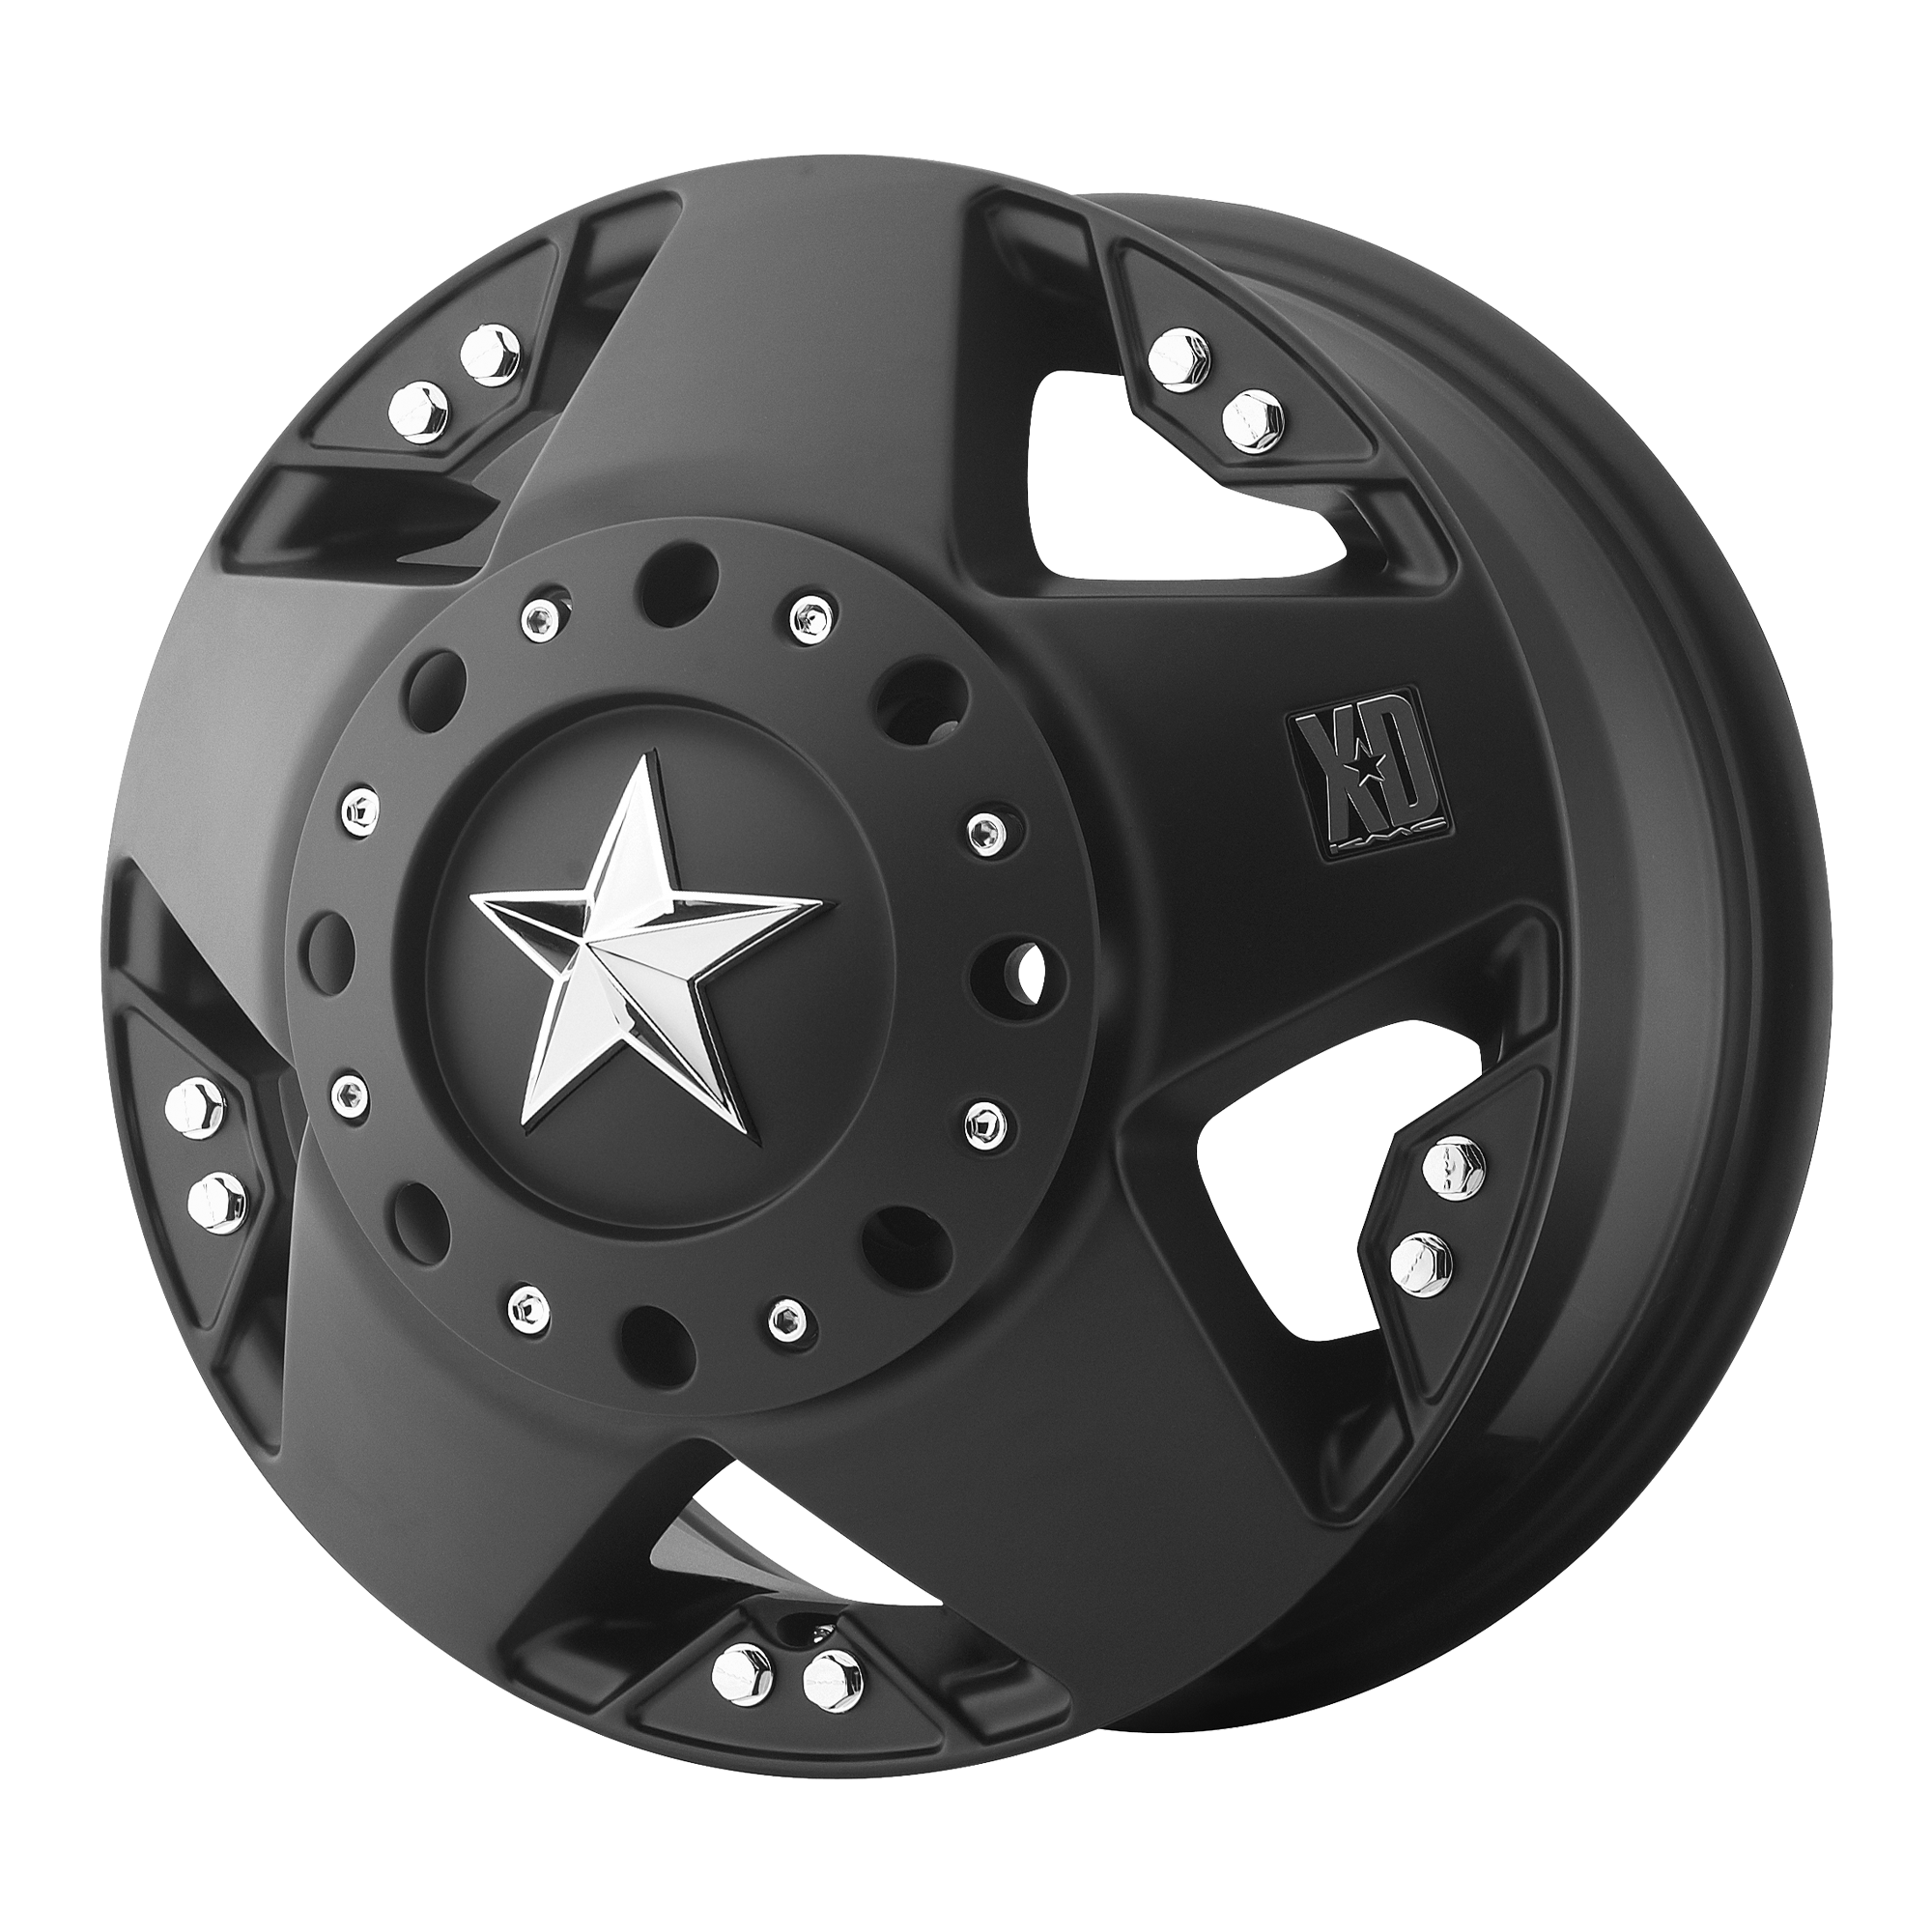 ROCKSTAR 16x6 8x165.10 DUALLY MATTE BLACK FRONT (111 mm) - Tires and Engine Performance